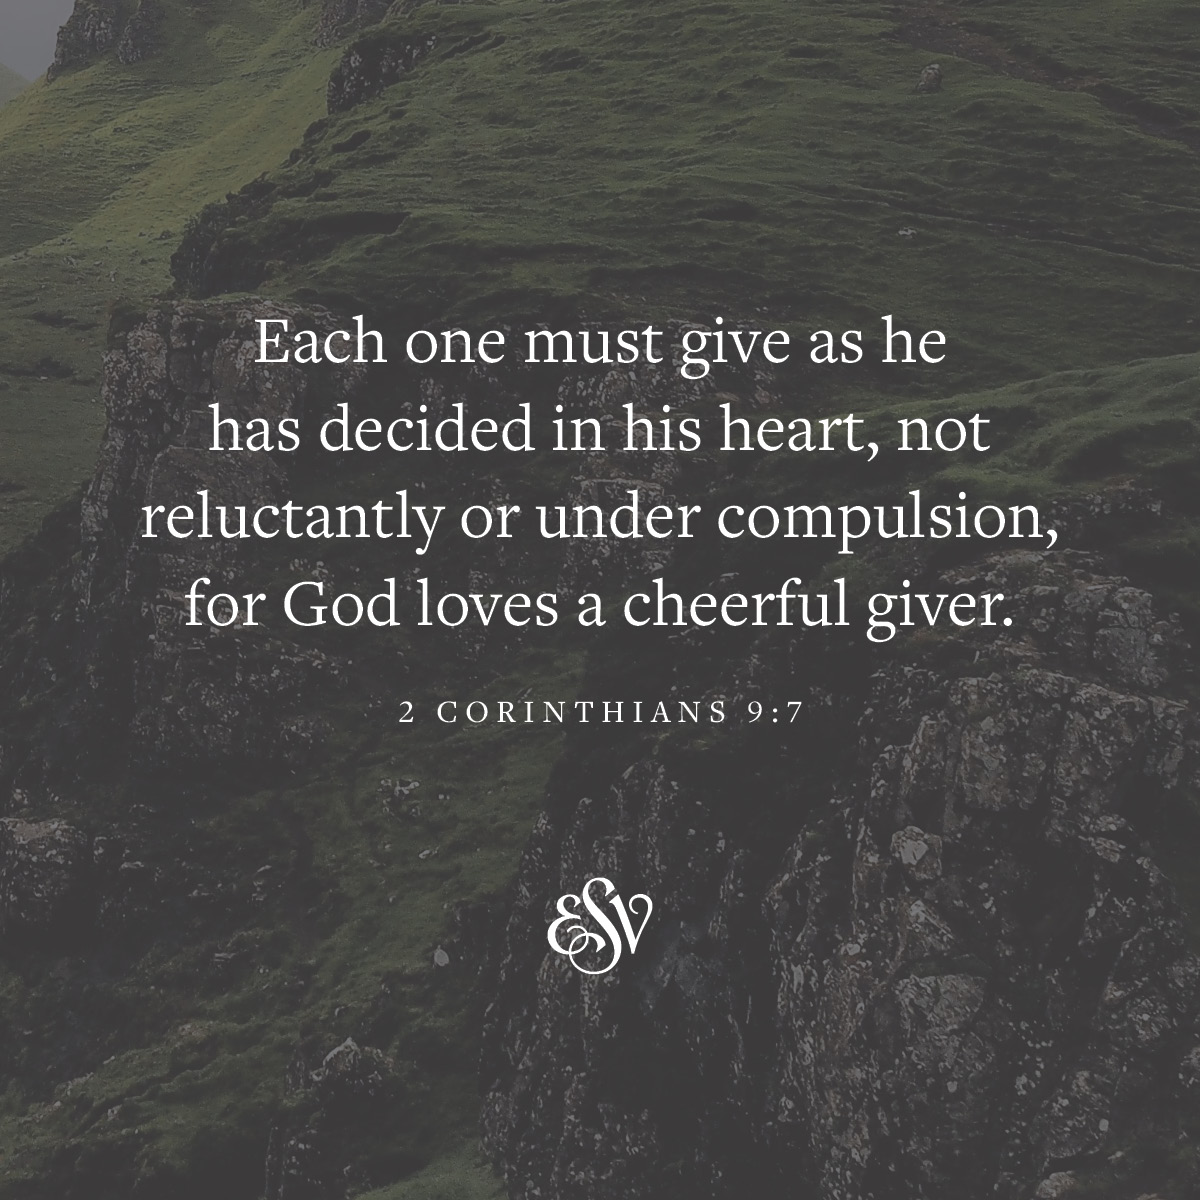 Each one must give as he has decided in his heart, not reluctantly or under compulsion, for God loves a cheerful giver. 
—2 Corinthians 9:7 ESV.org

#Verseoftheday #ESV #Scripturememoryverse #Bible